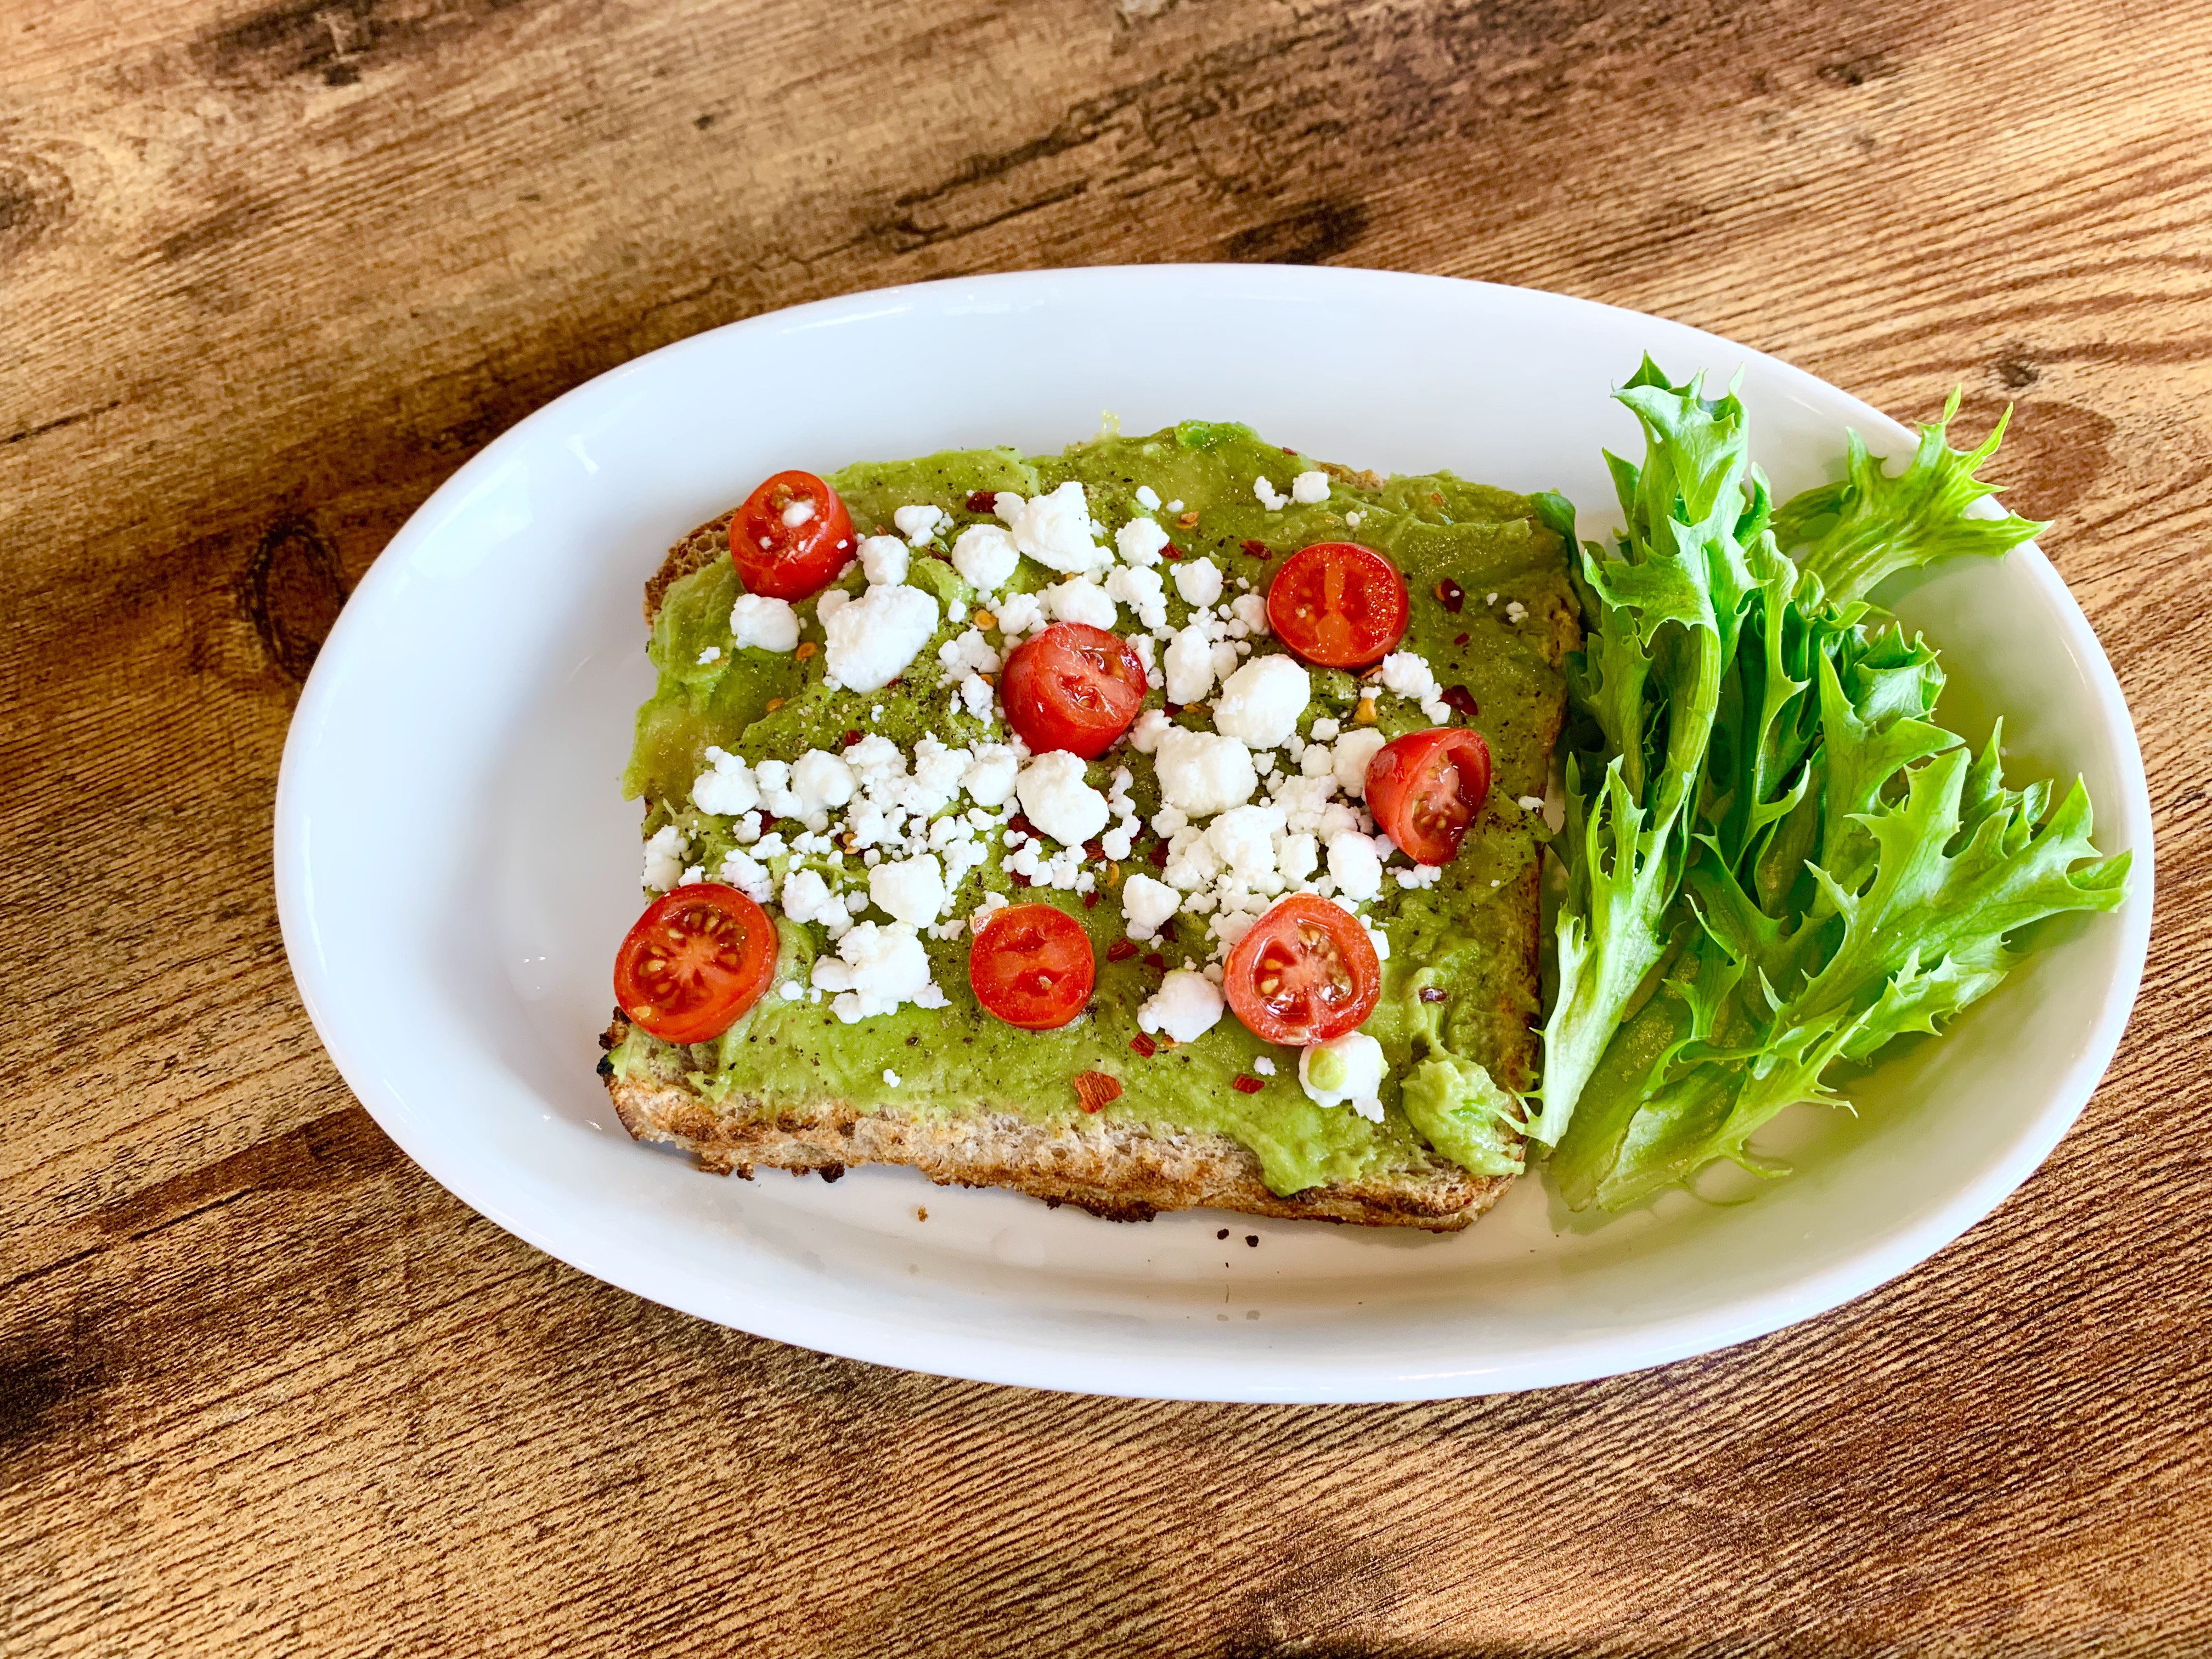 On a white plate, there is avocado toast topped with crumbled feta and tomatoes. Photo by Stephanie Wheatley.